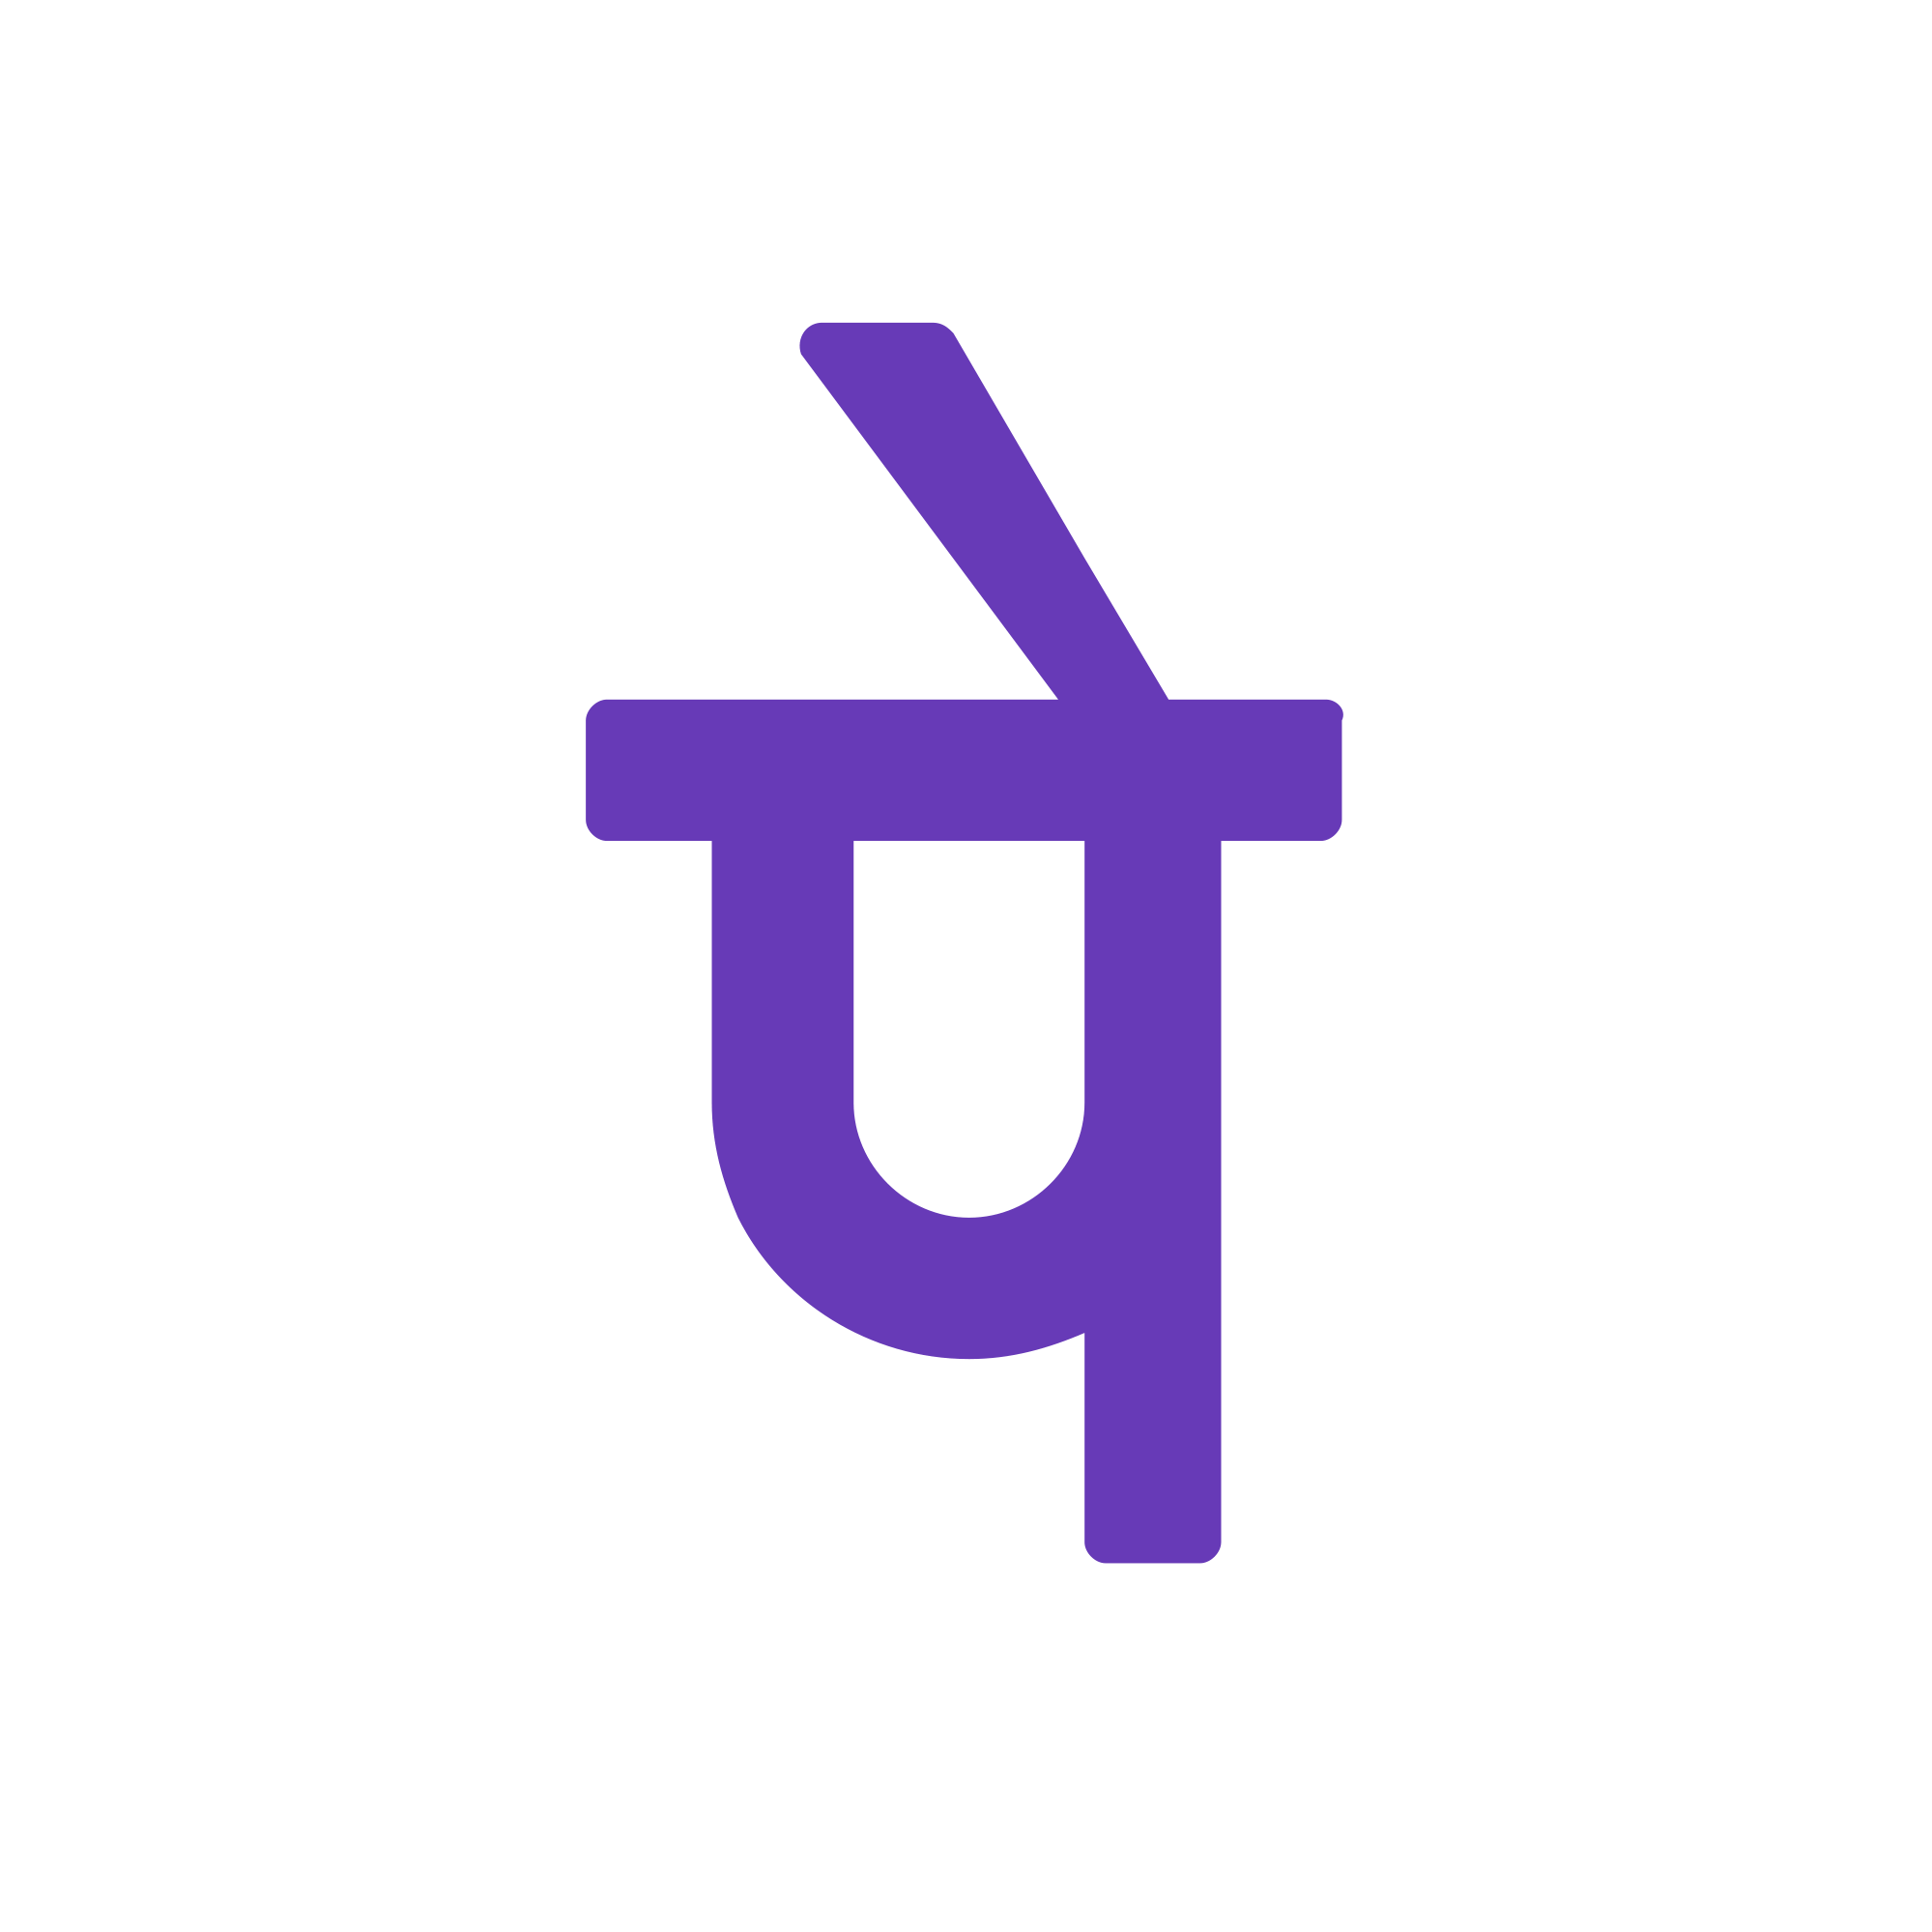 What is PhonePe